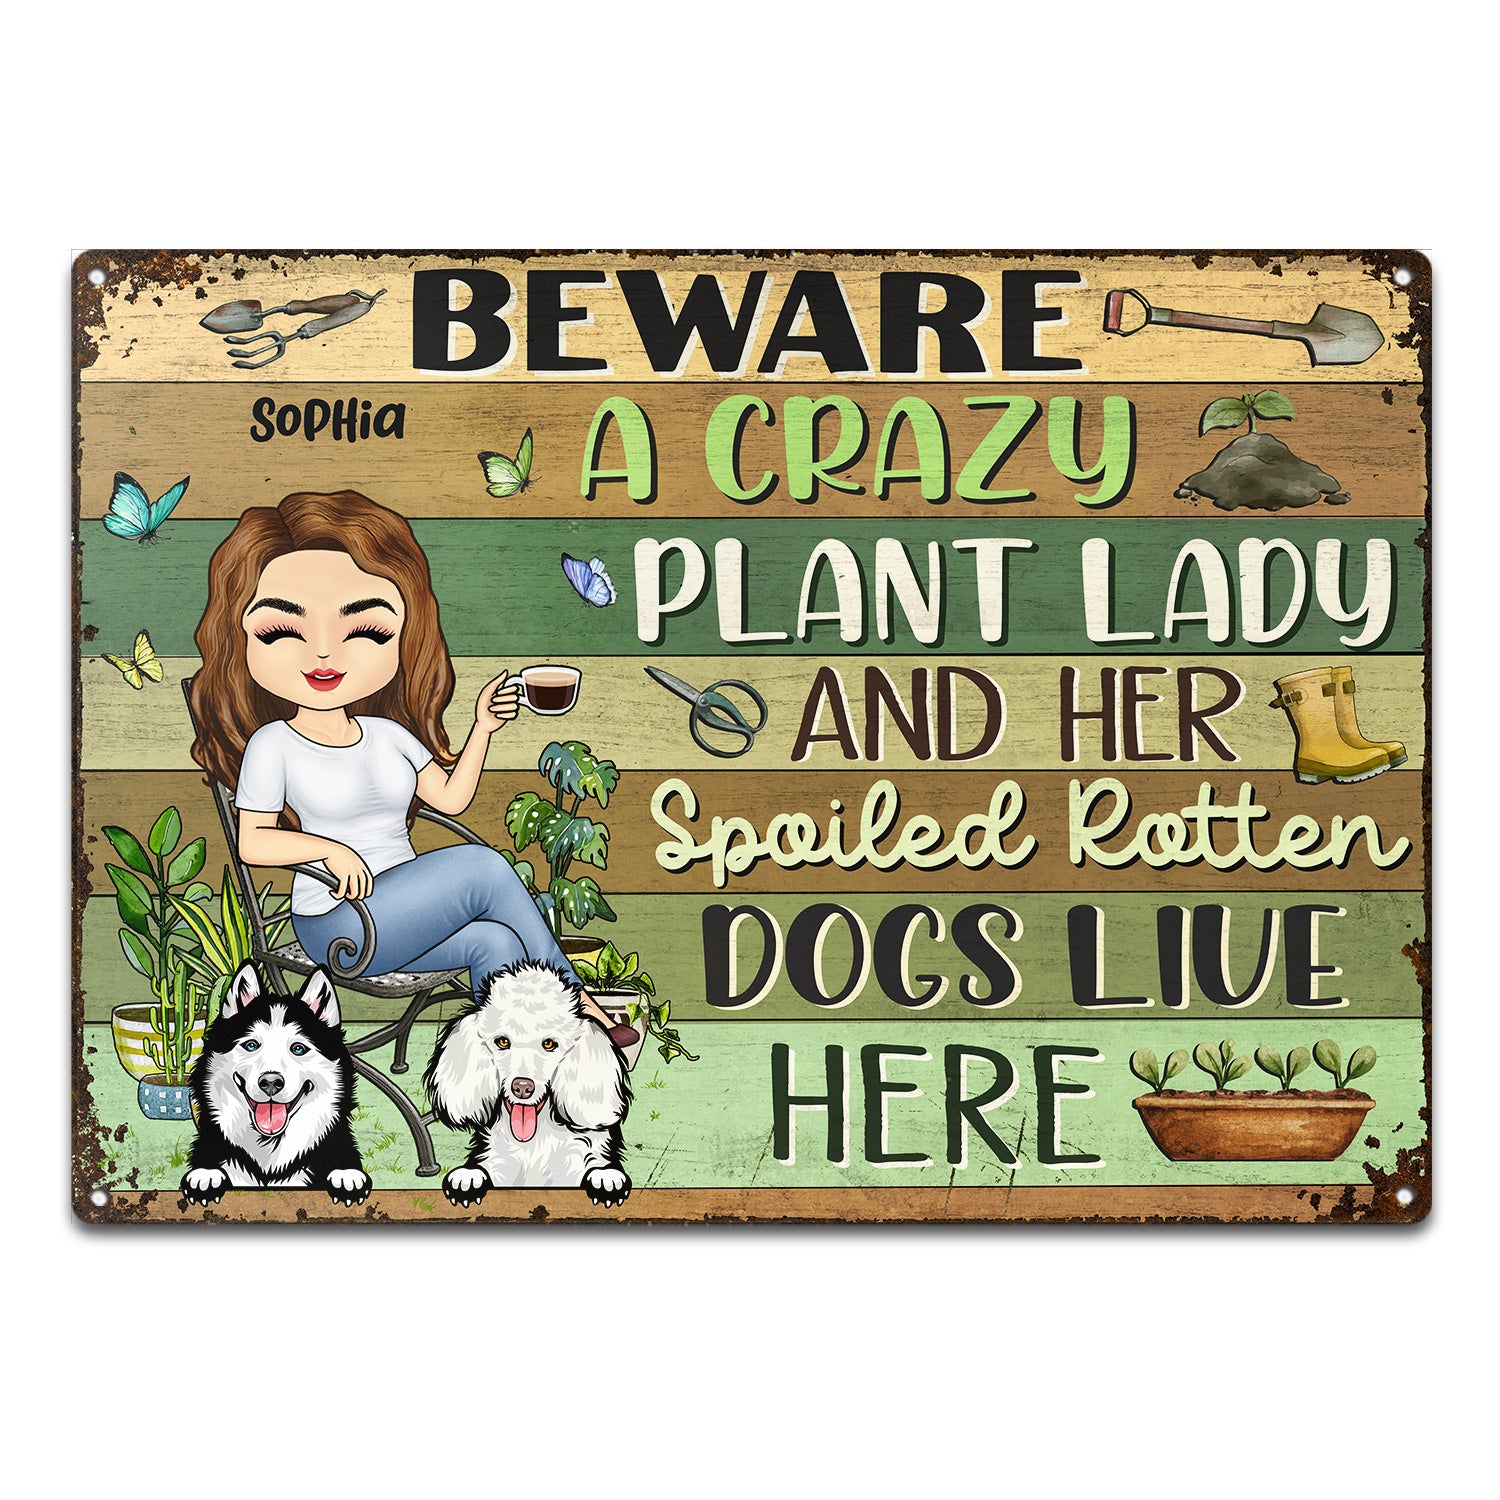 Beware A Crazy Plant Lady & Her Spoiled Rotten Dogs Cats Live Here Gardening Chibi - Garden Sign, Birthday, Housewarming Gift For Her, Him, Gardener, Outdoor Decor - Personalized Custom Classic Metal Signs